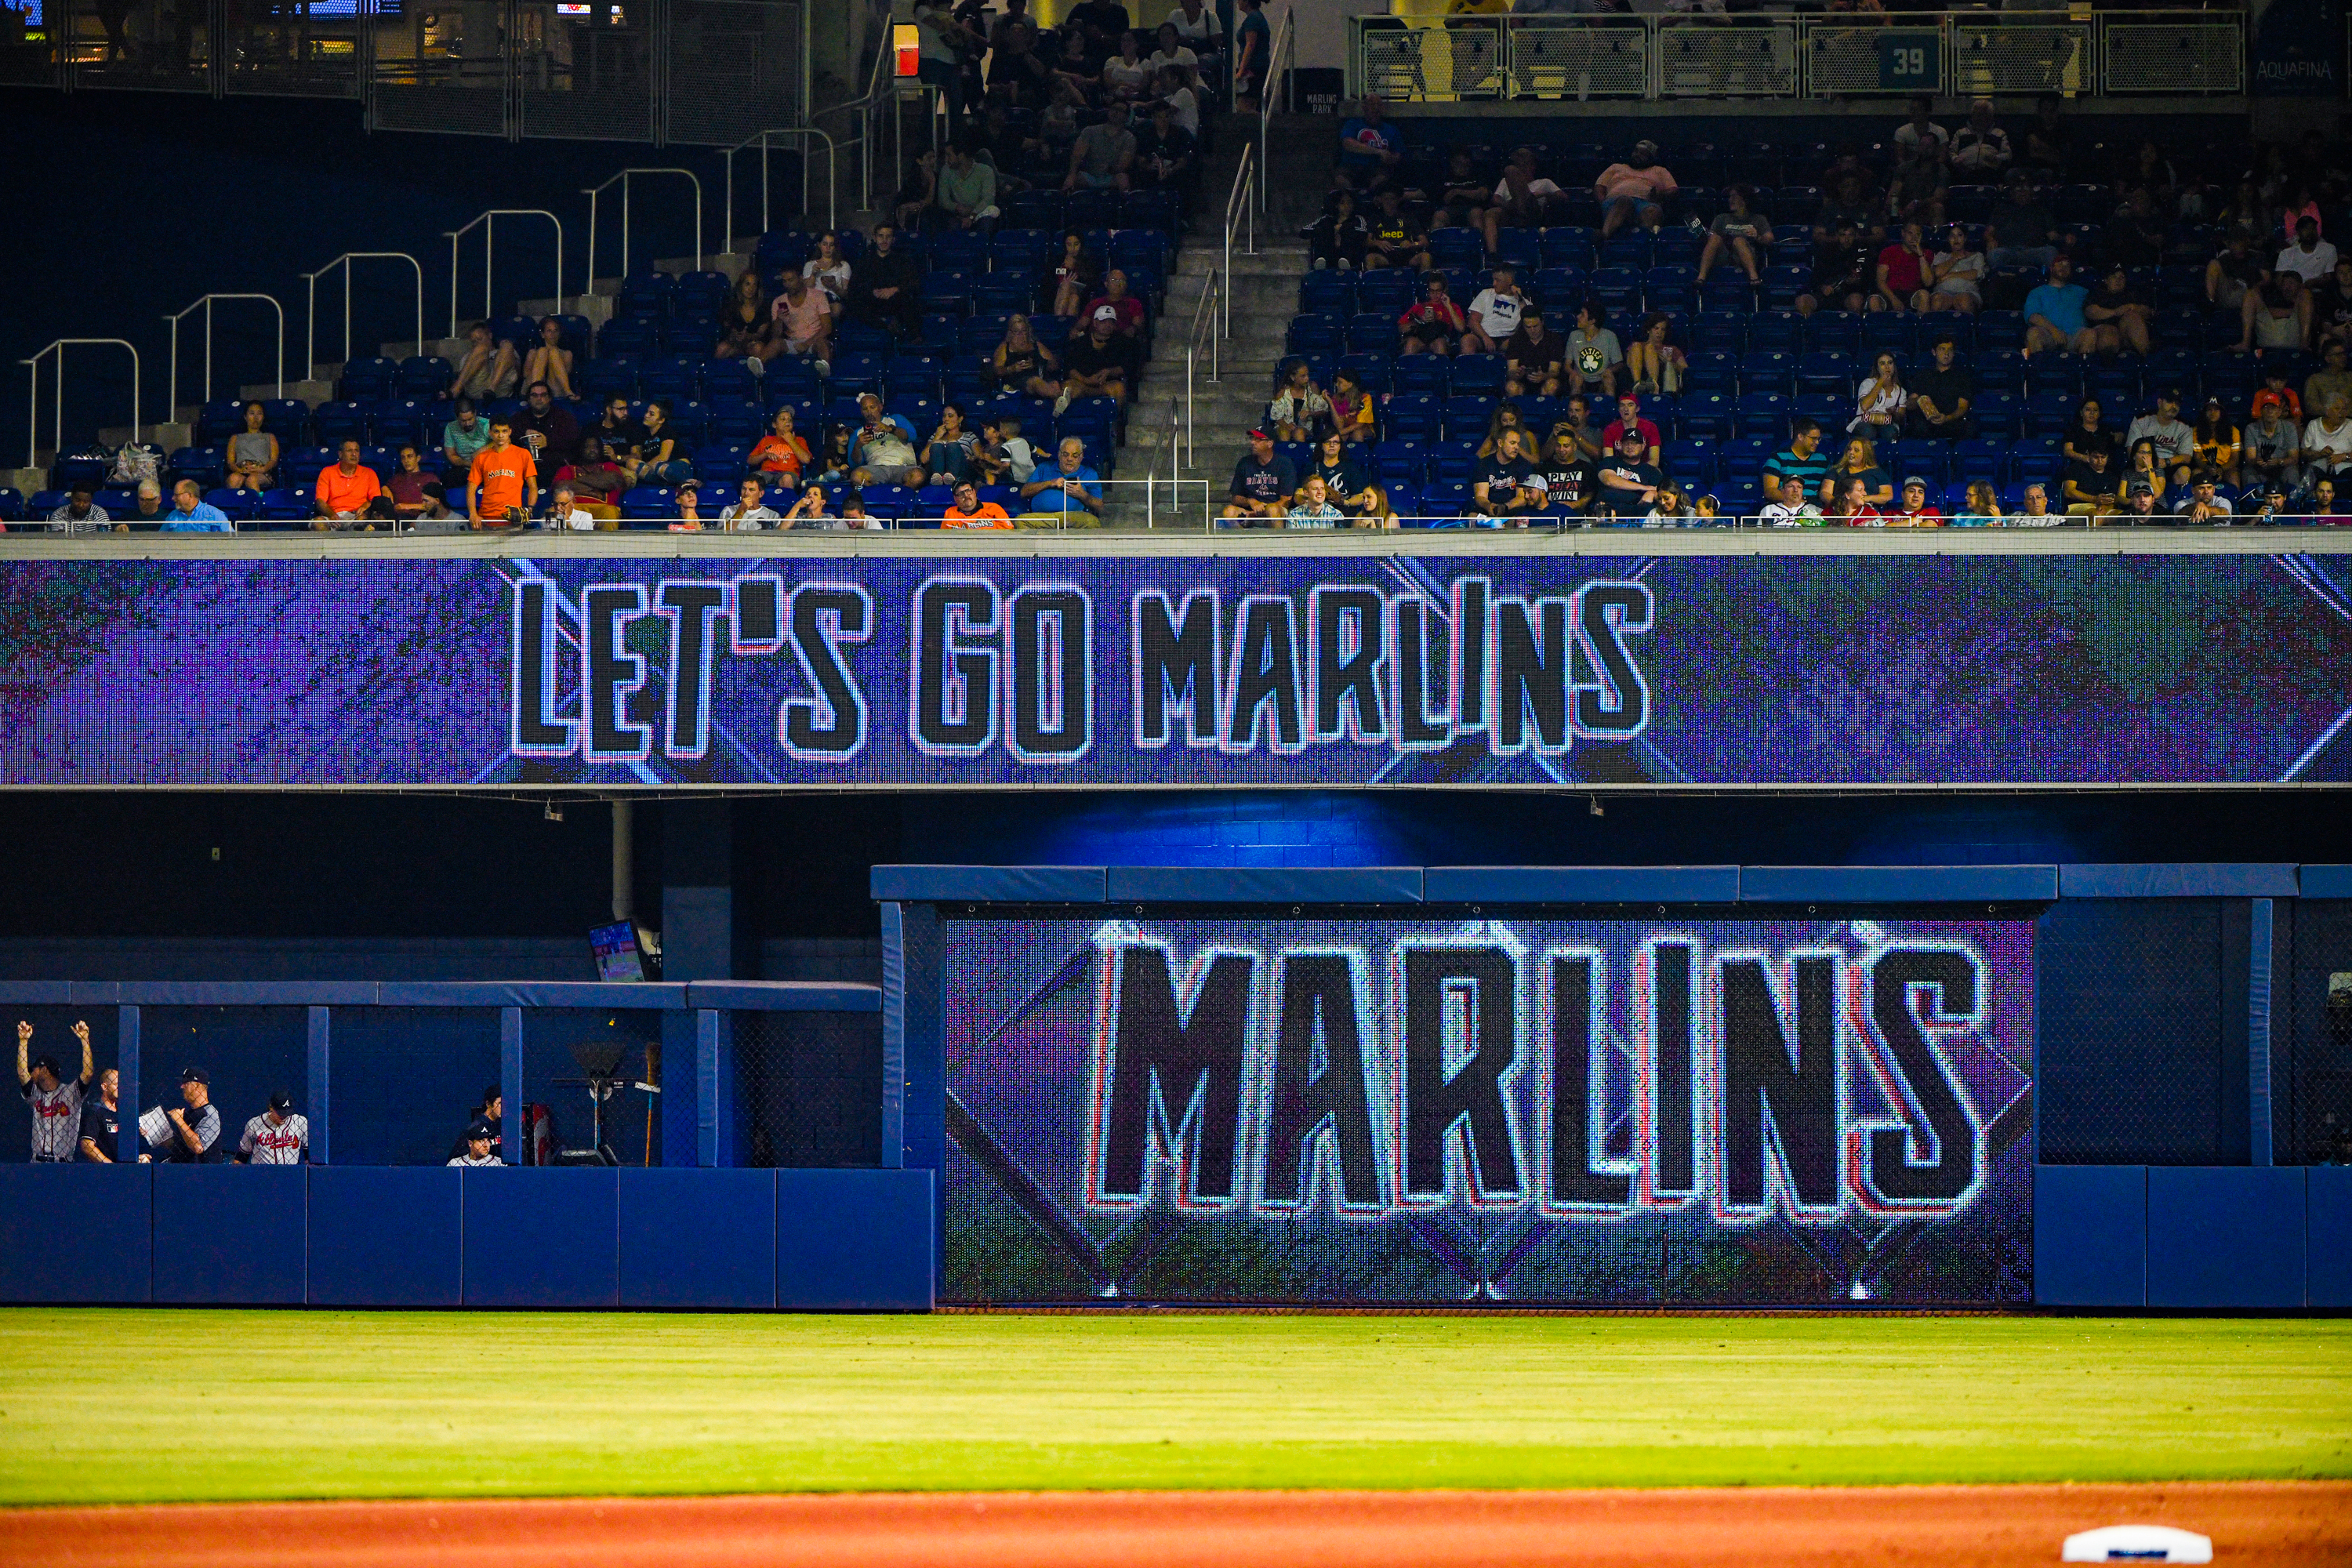 Stadium countdown: Marlins Park has many allures